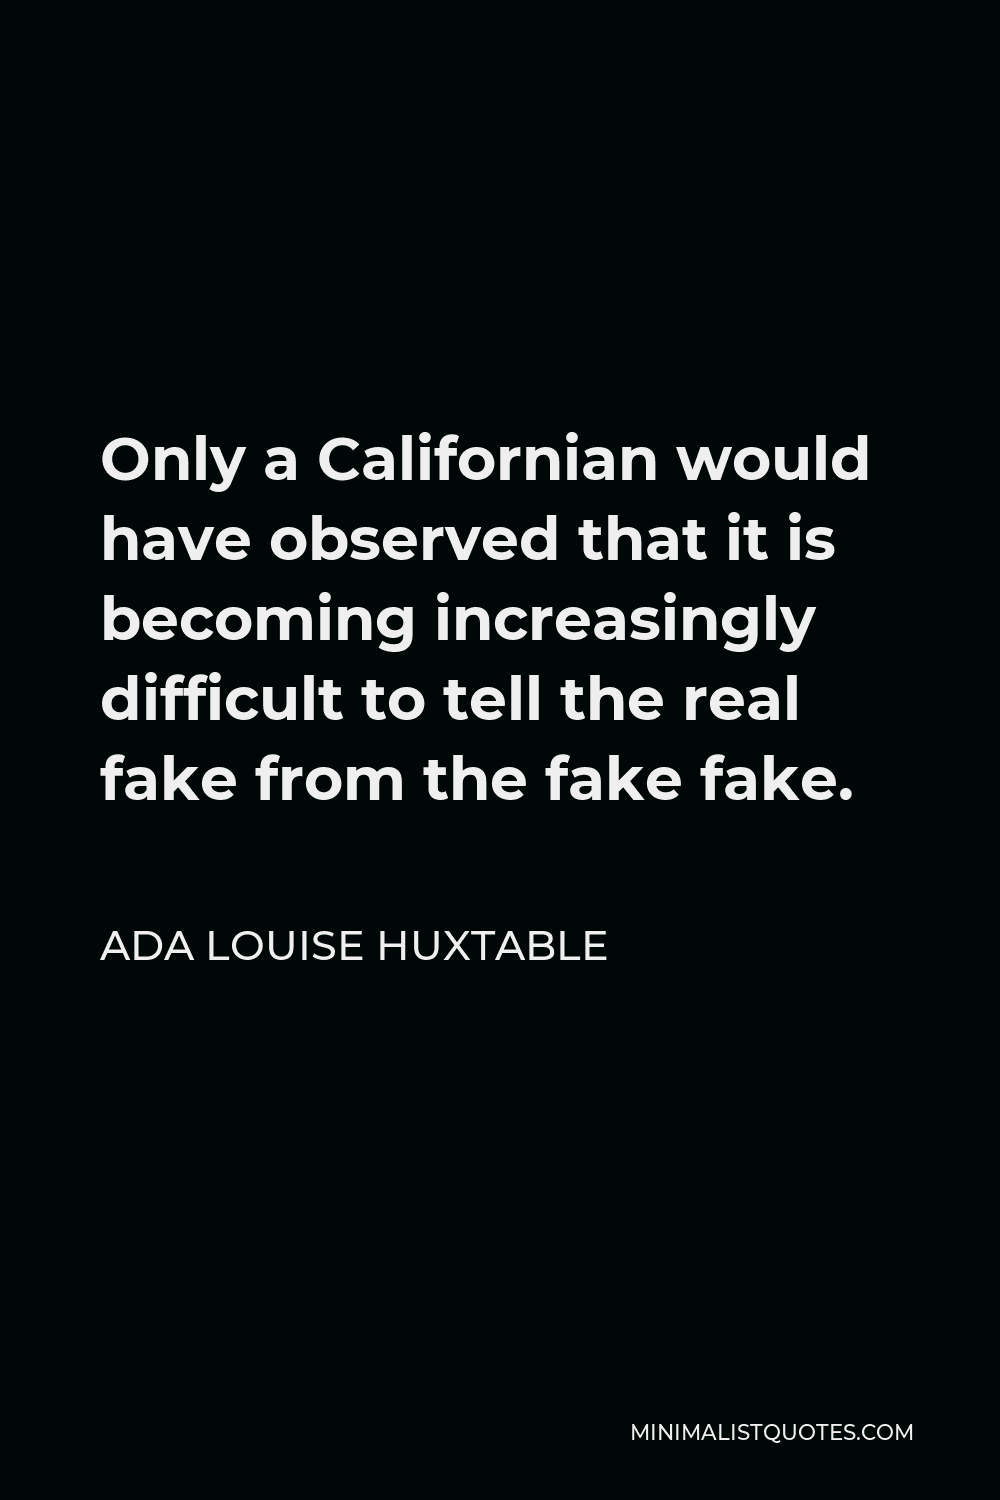 Ada Louise Huxtable Quote - Only a Californian would have observed that it is becoming increasingly difficult to tell the real fake from the fake fake.